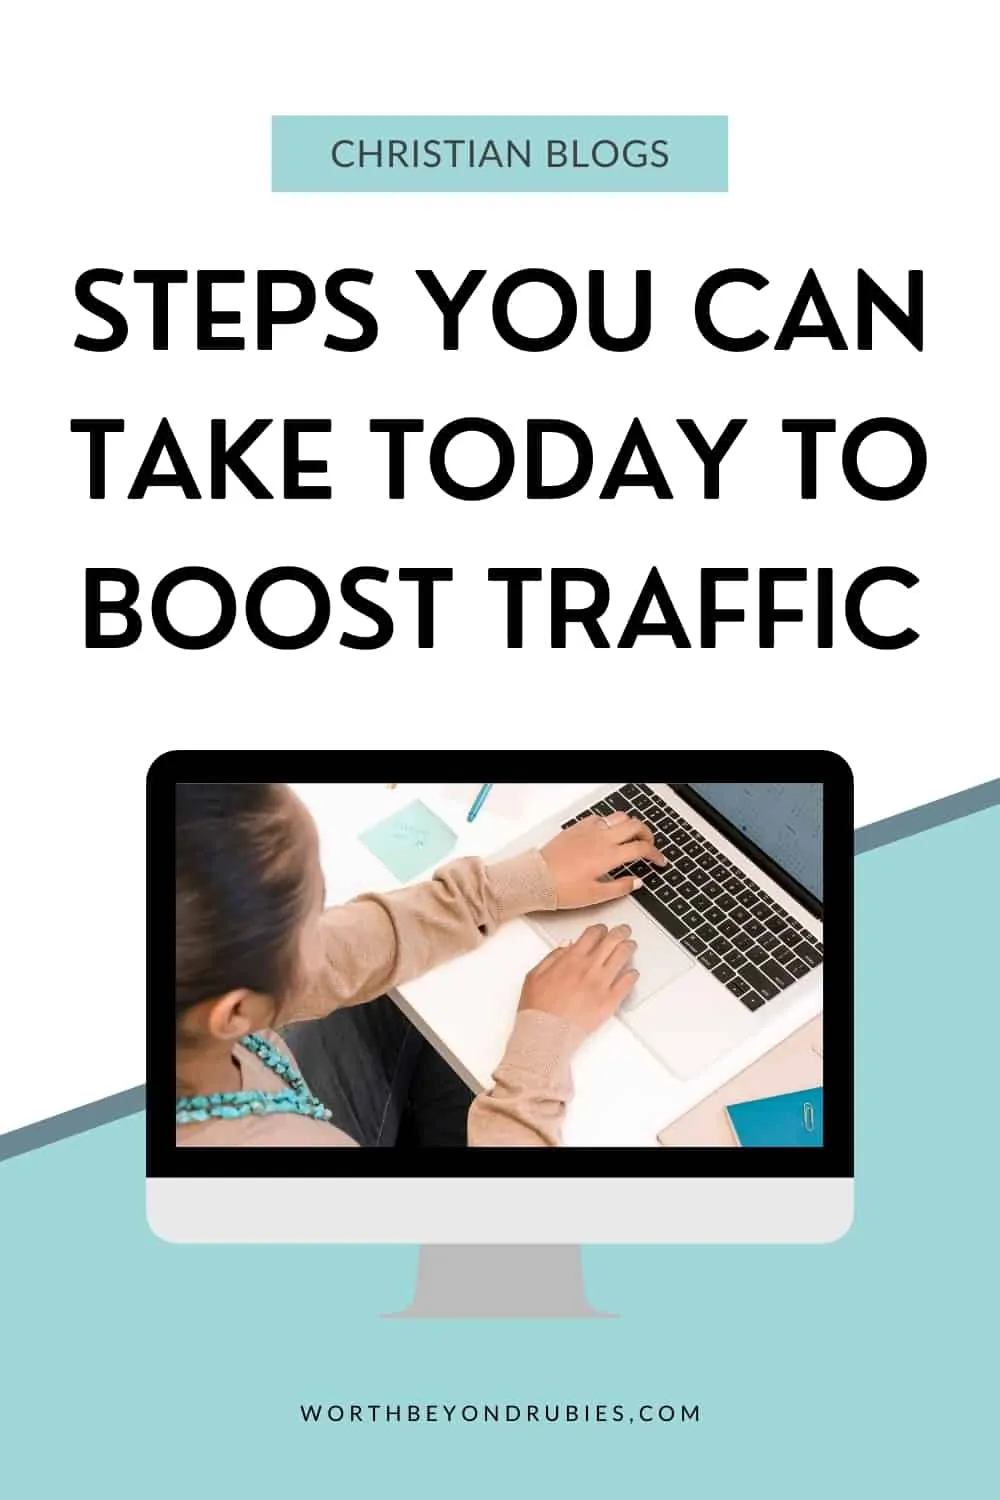 A woman with dark hair pulled back and a turquoise necklace and brown sweater sitting at a laptop at a desk that has blue and light green accessories on it and she is typing on the keyboard - Text overlay that says Christian Blogs - Steps You Can Take TODAY to Boost Blog Traffic 